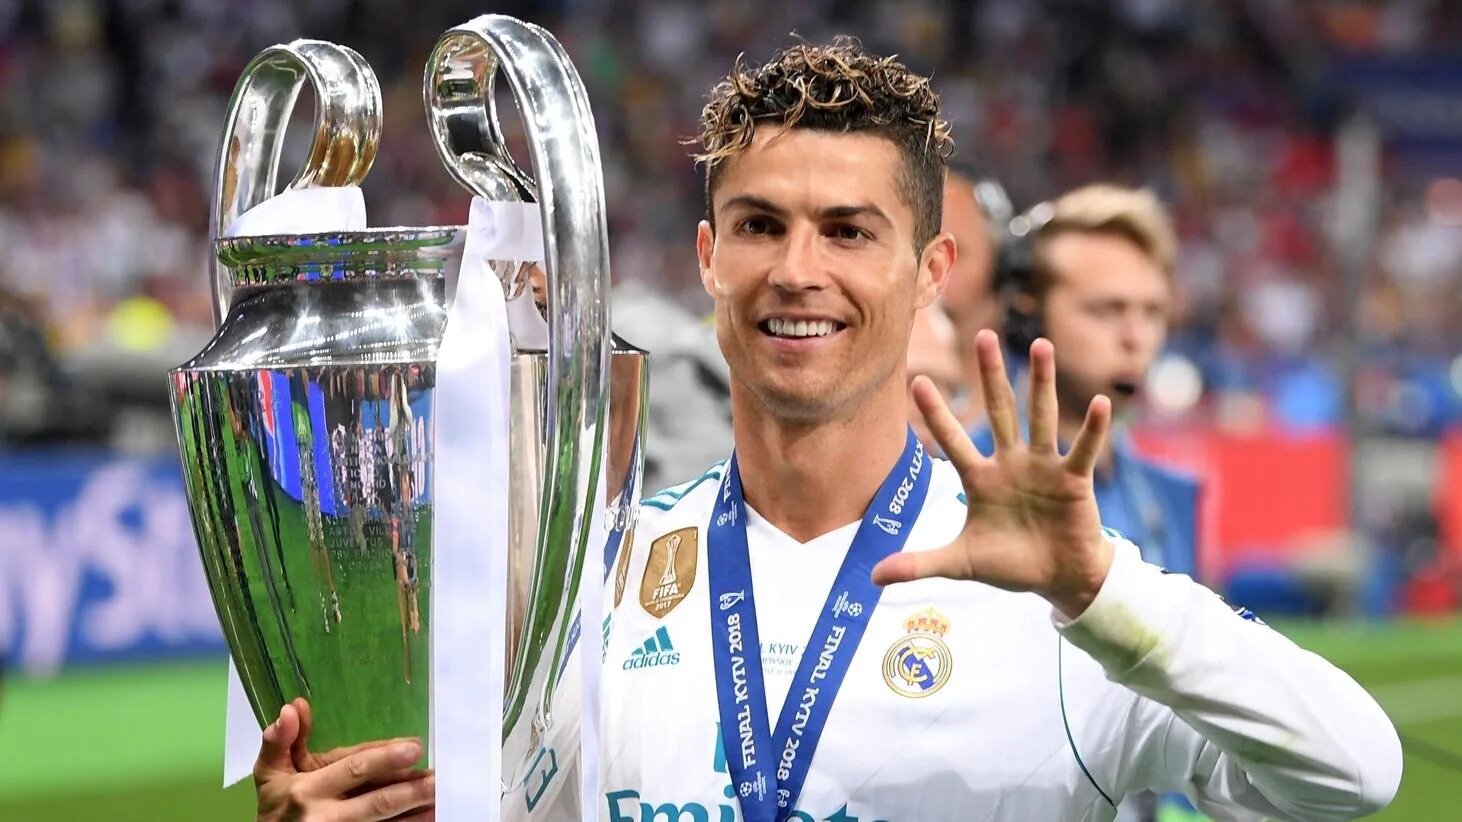 Cristiano Ronaldo: List of trophies (Individual and Team)